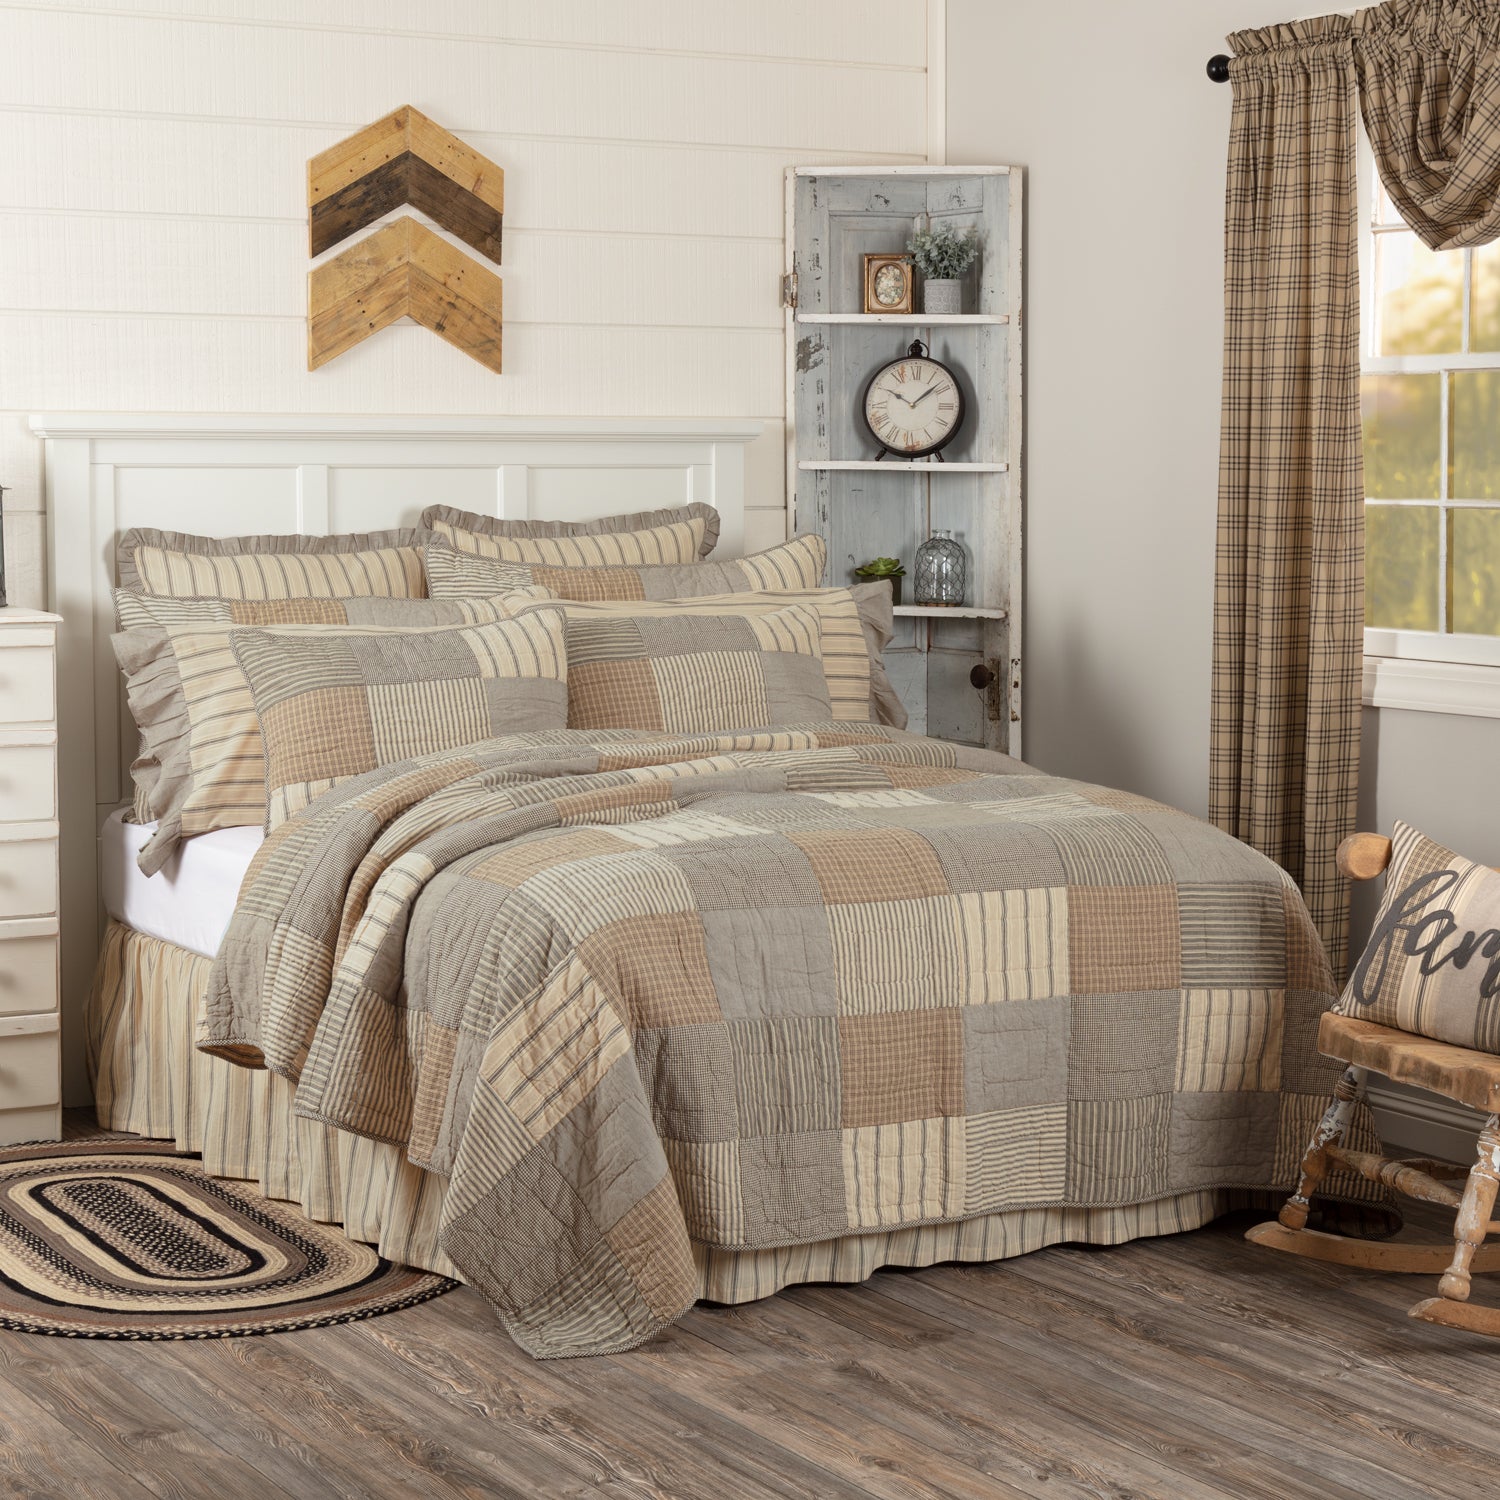 45724-Sawyer-Mill-Charcoal-California-King-Quilt-130Wx115L-image-3